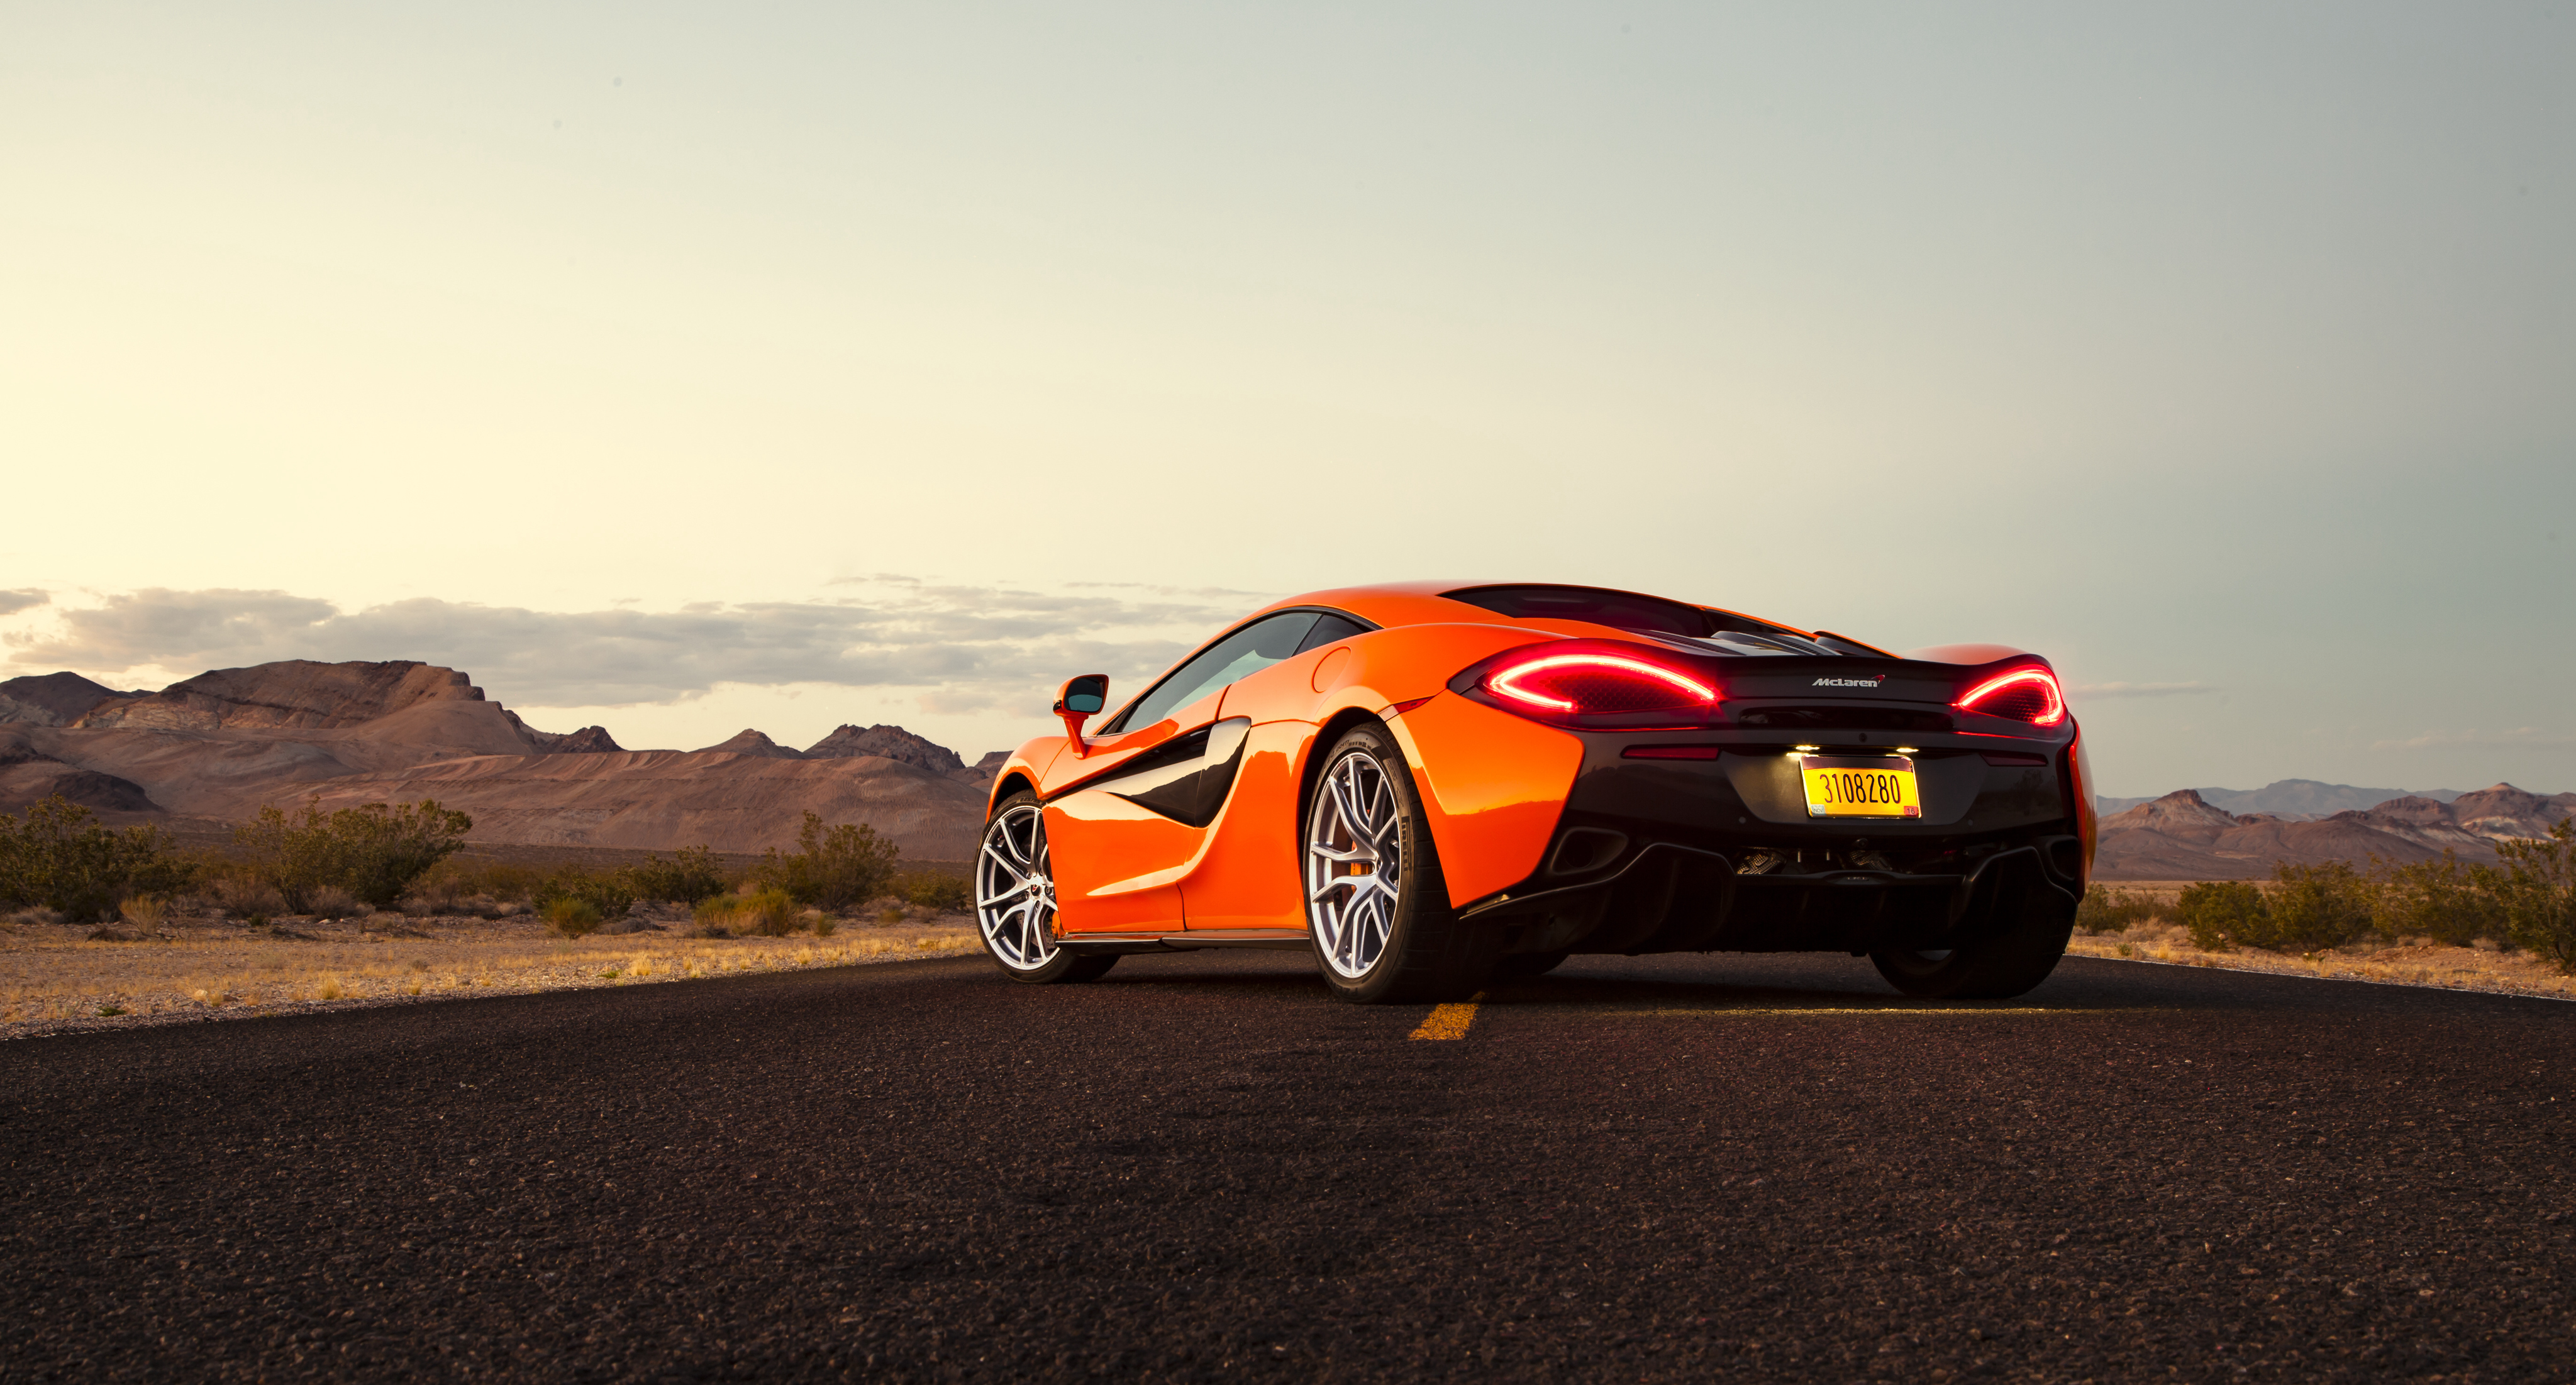 108955 Screensavers and Wallpapers Rear View for phone. Download mclaren, cars, orange, back view, rear view, 570s pictures for free